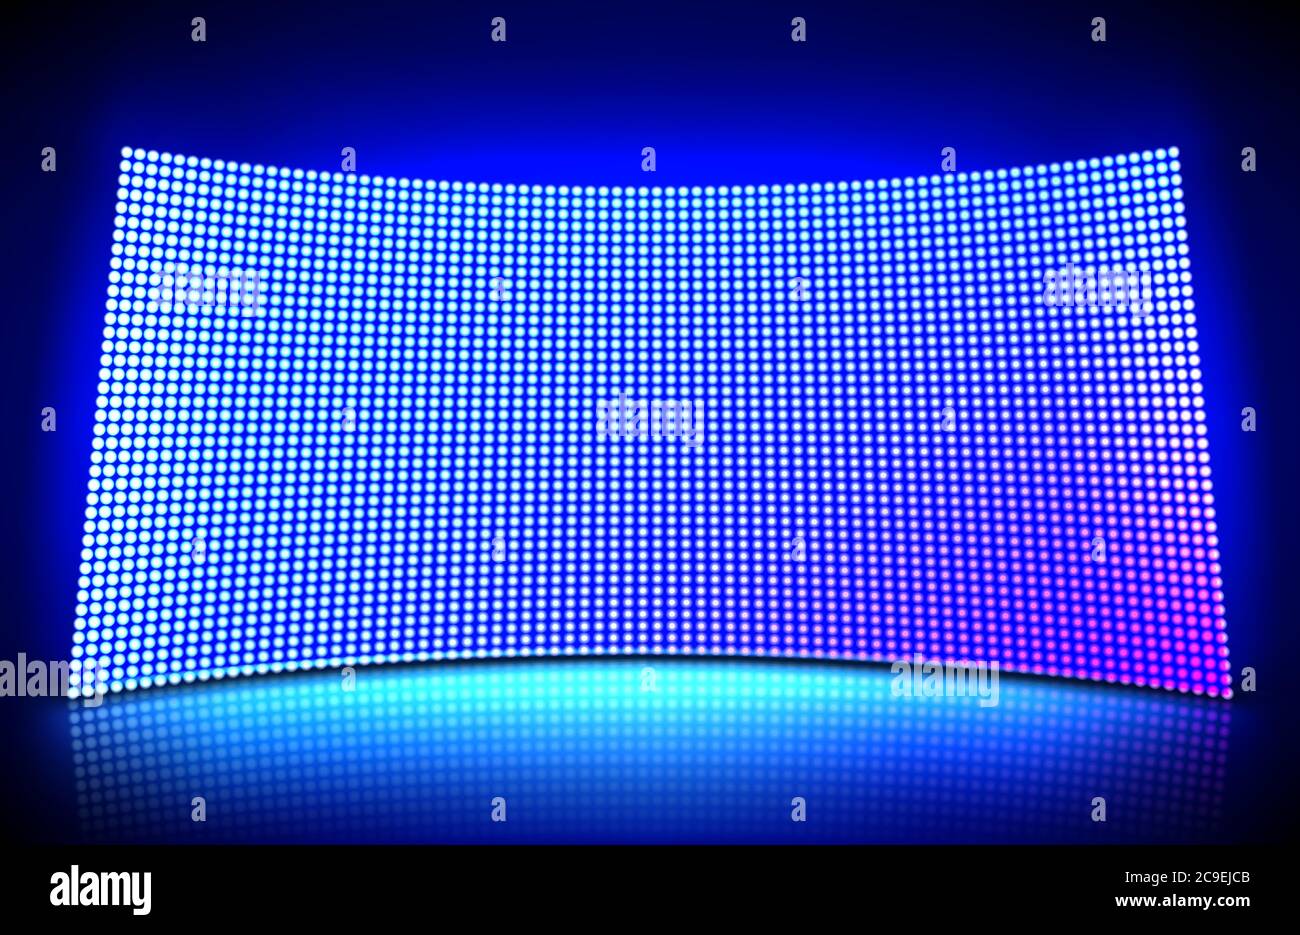 Concave led wall video screen with glowing blue and purple dot lights. Vector illustration of grid pattern for led display on stadium or scene. Curved digital panel with mesh of diode lamps Stock Vector